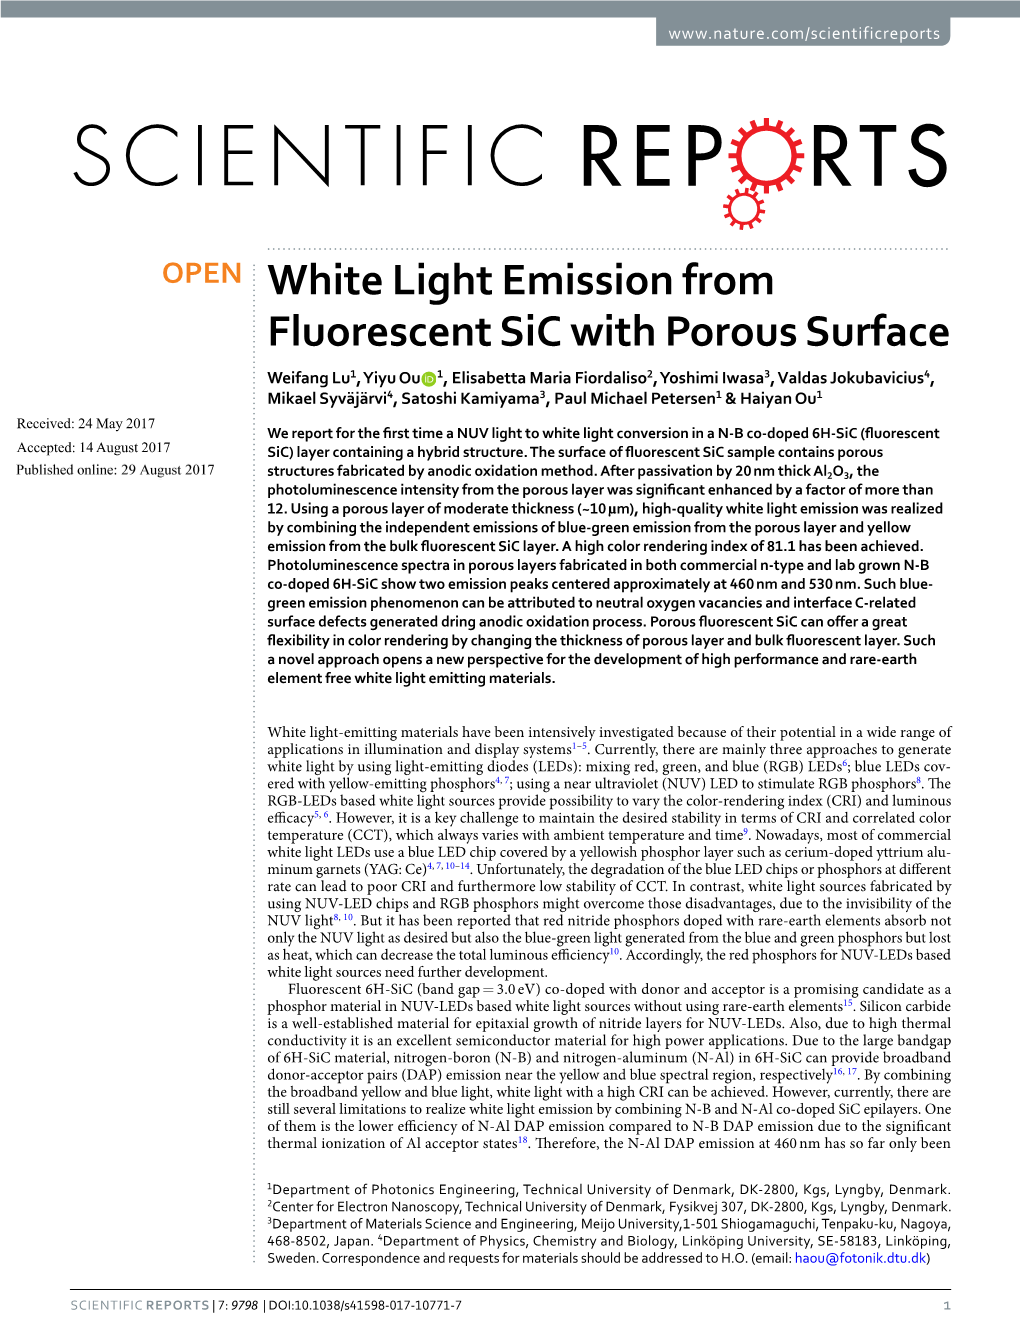 White Light Emission from Fluorescent Sic with Porous Surface